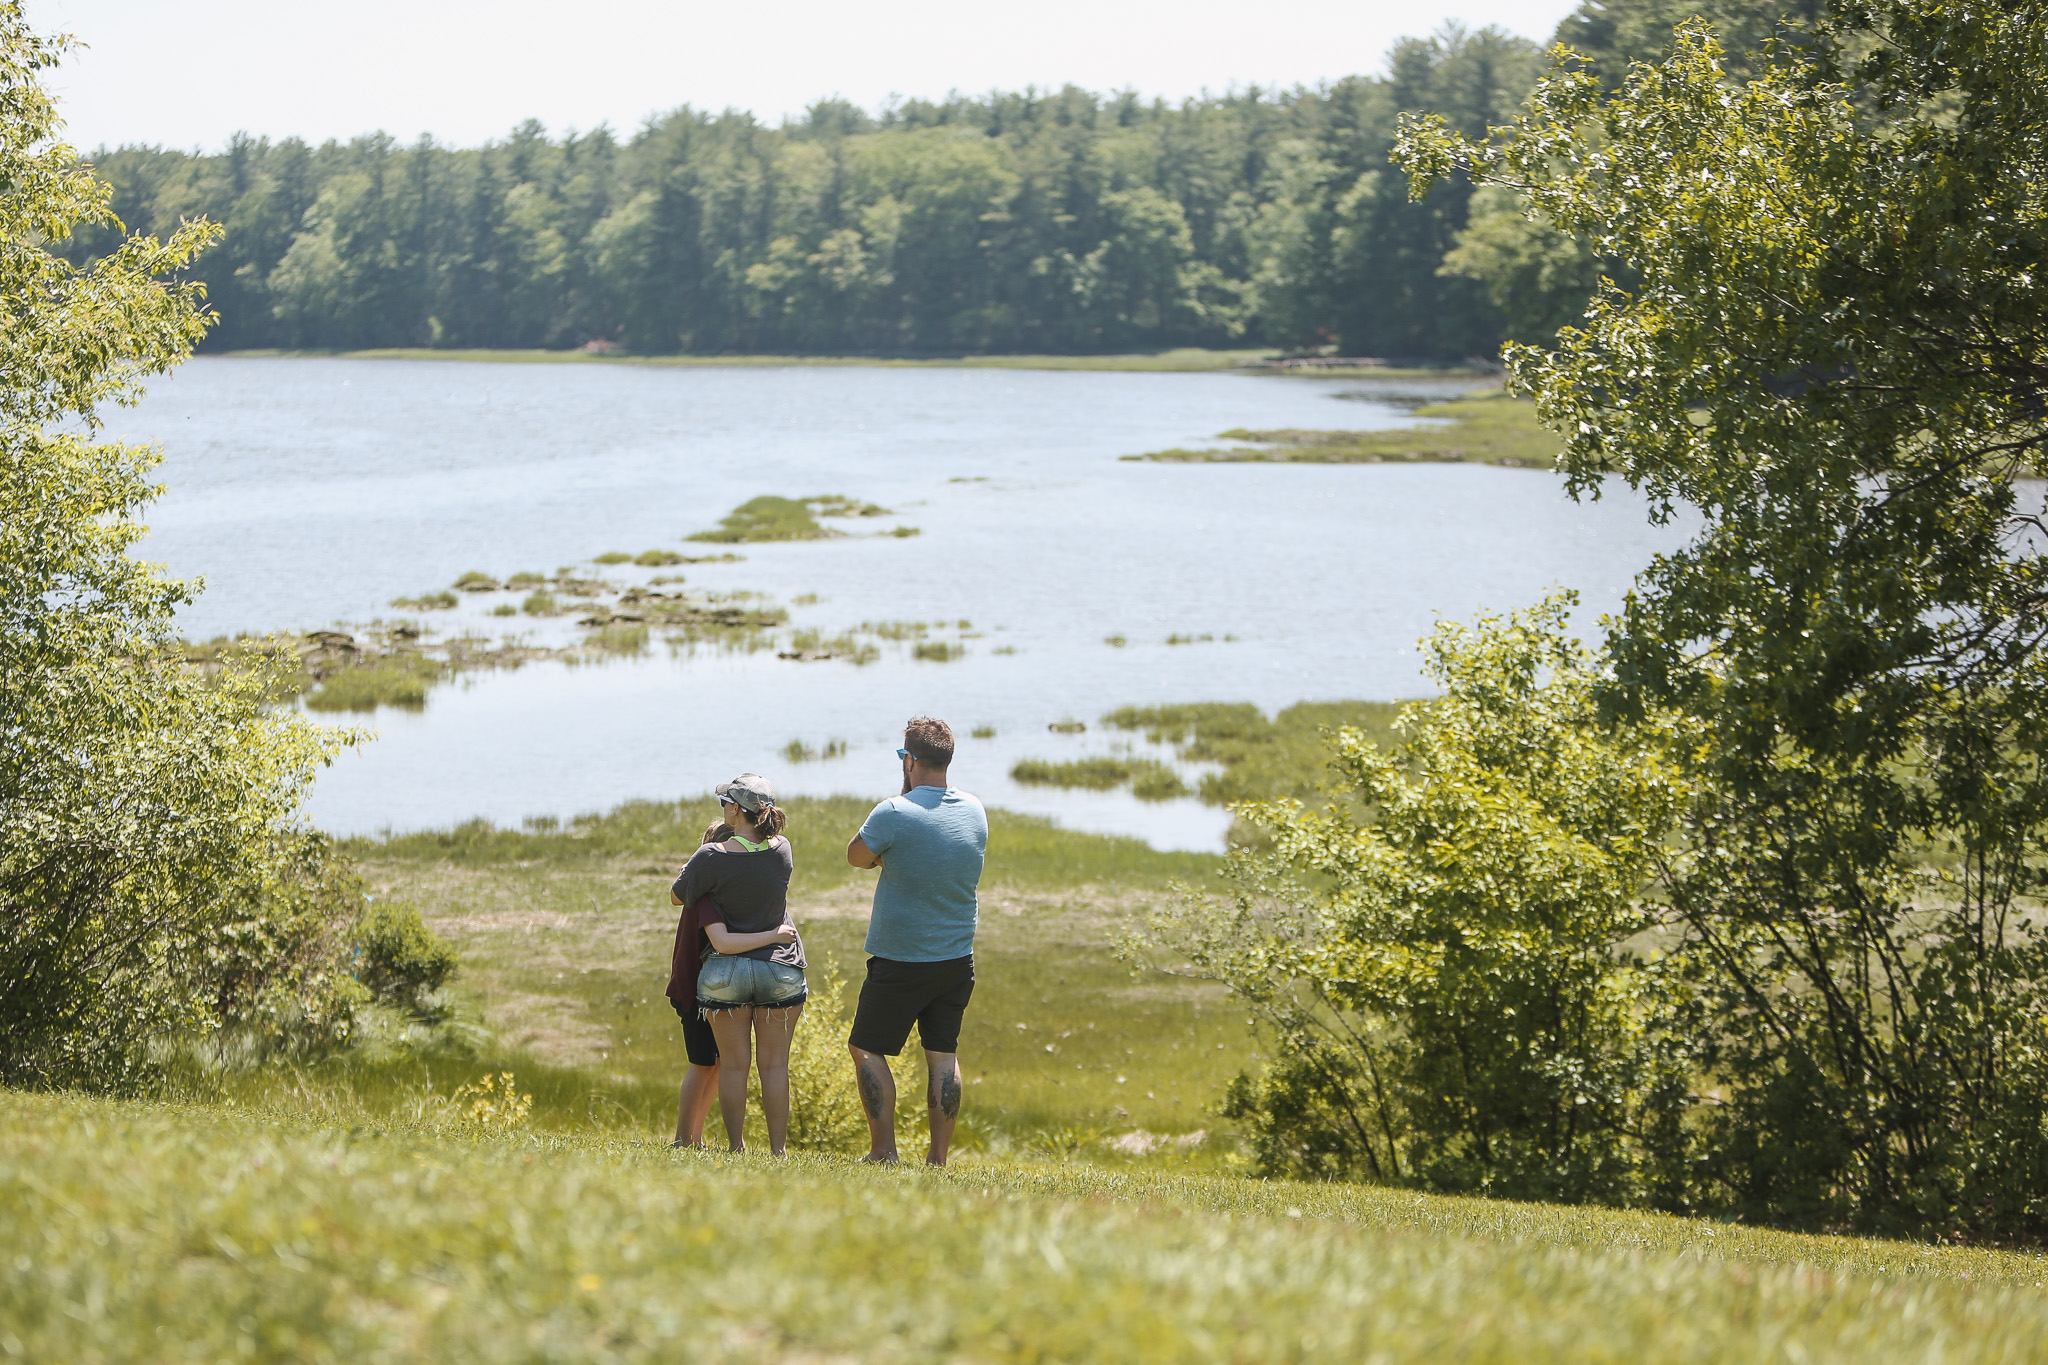 Two people walking on a grassy hill near a lake.